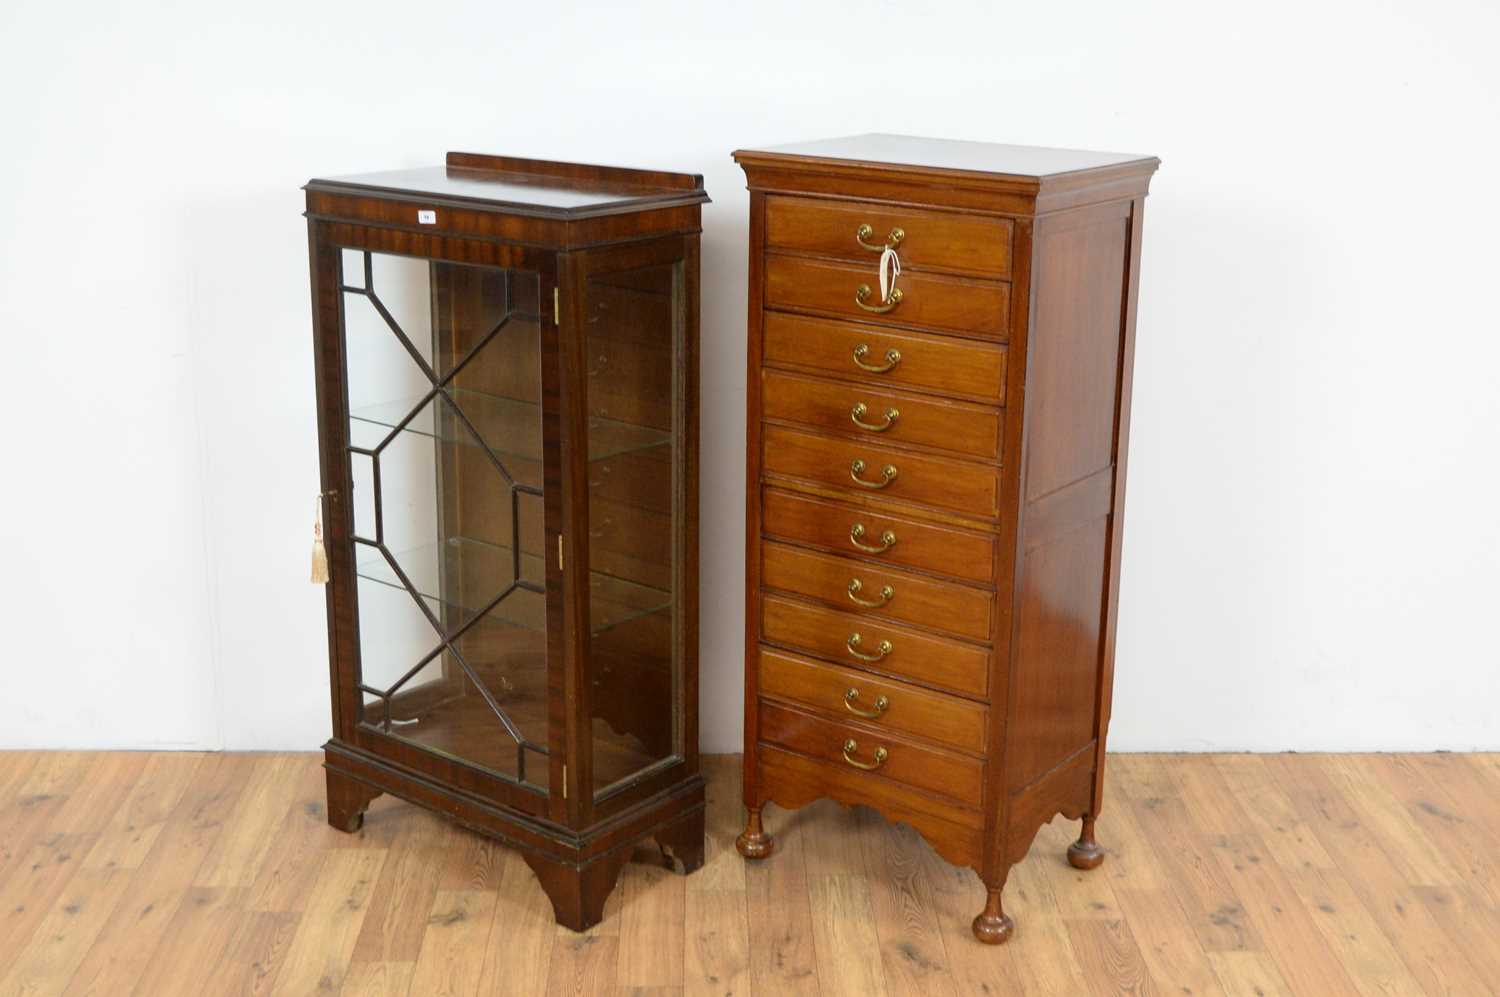 A 20th Century mahogany music cabinet with a glazed bookcase